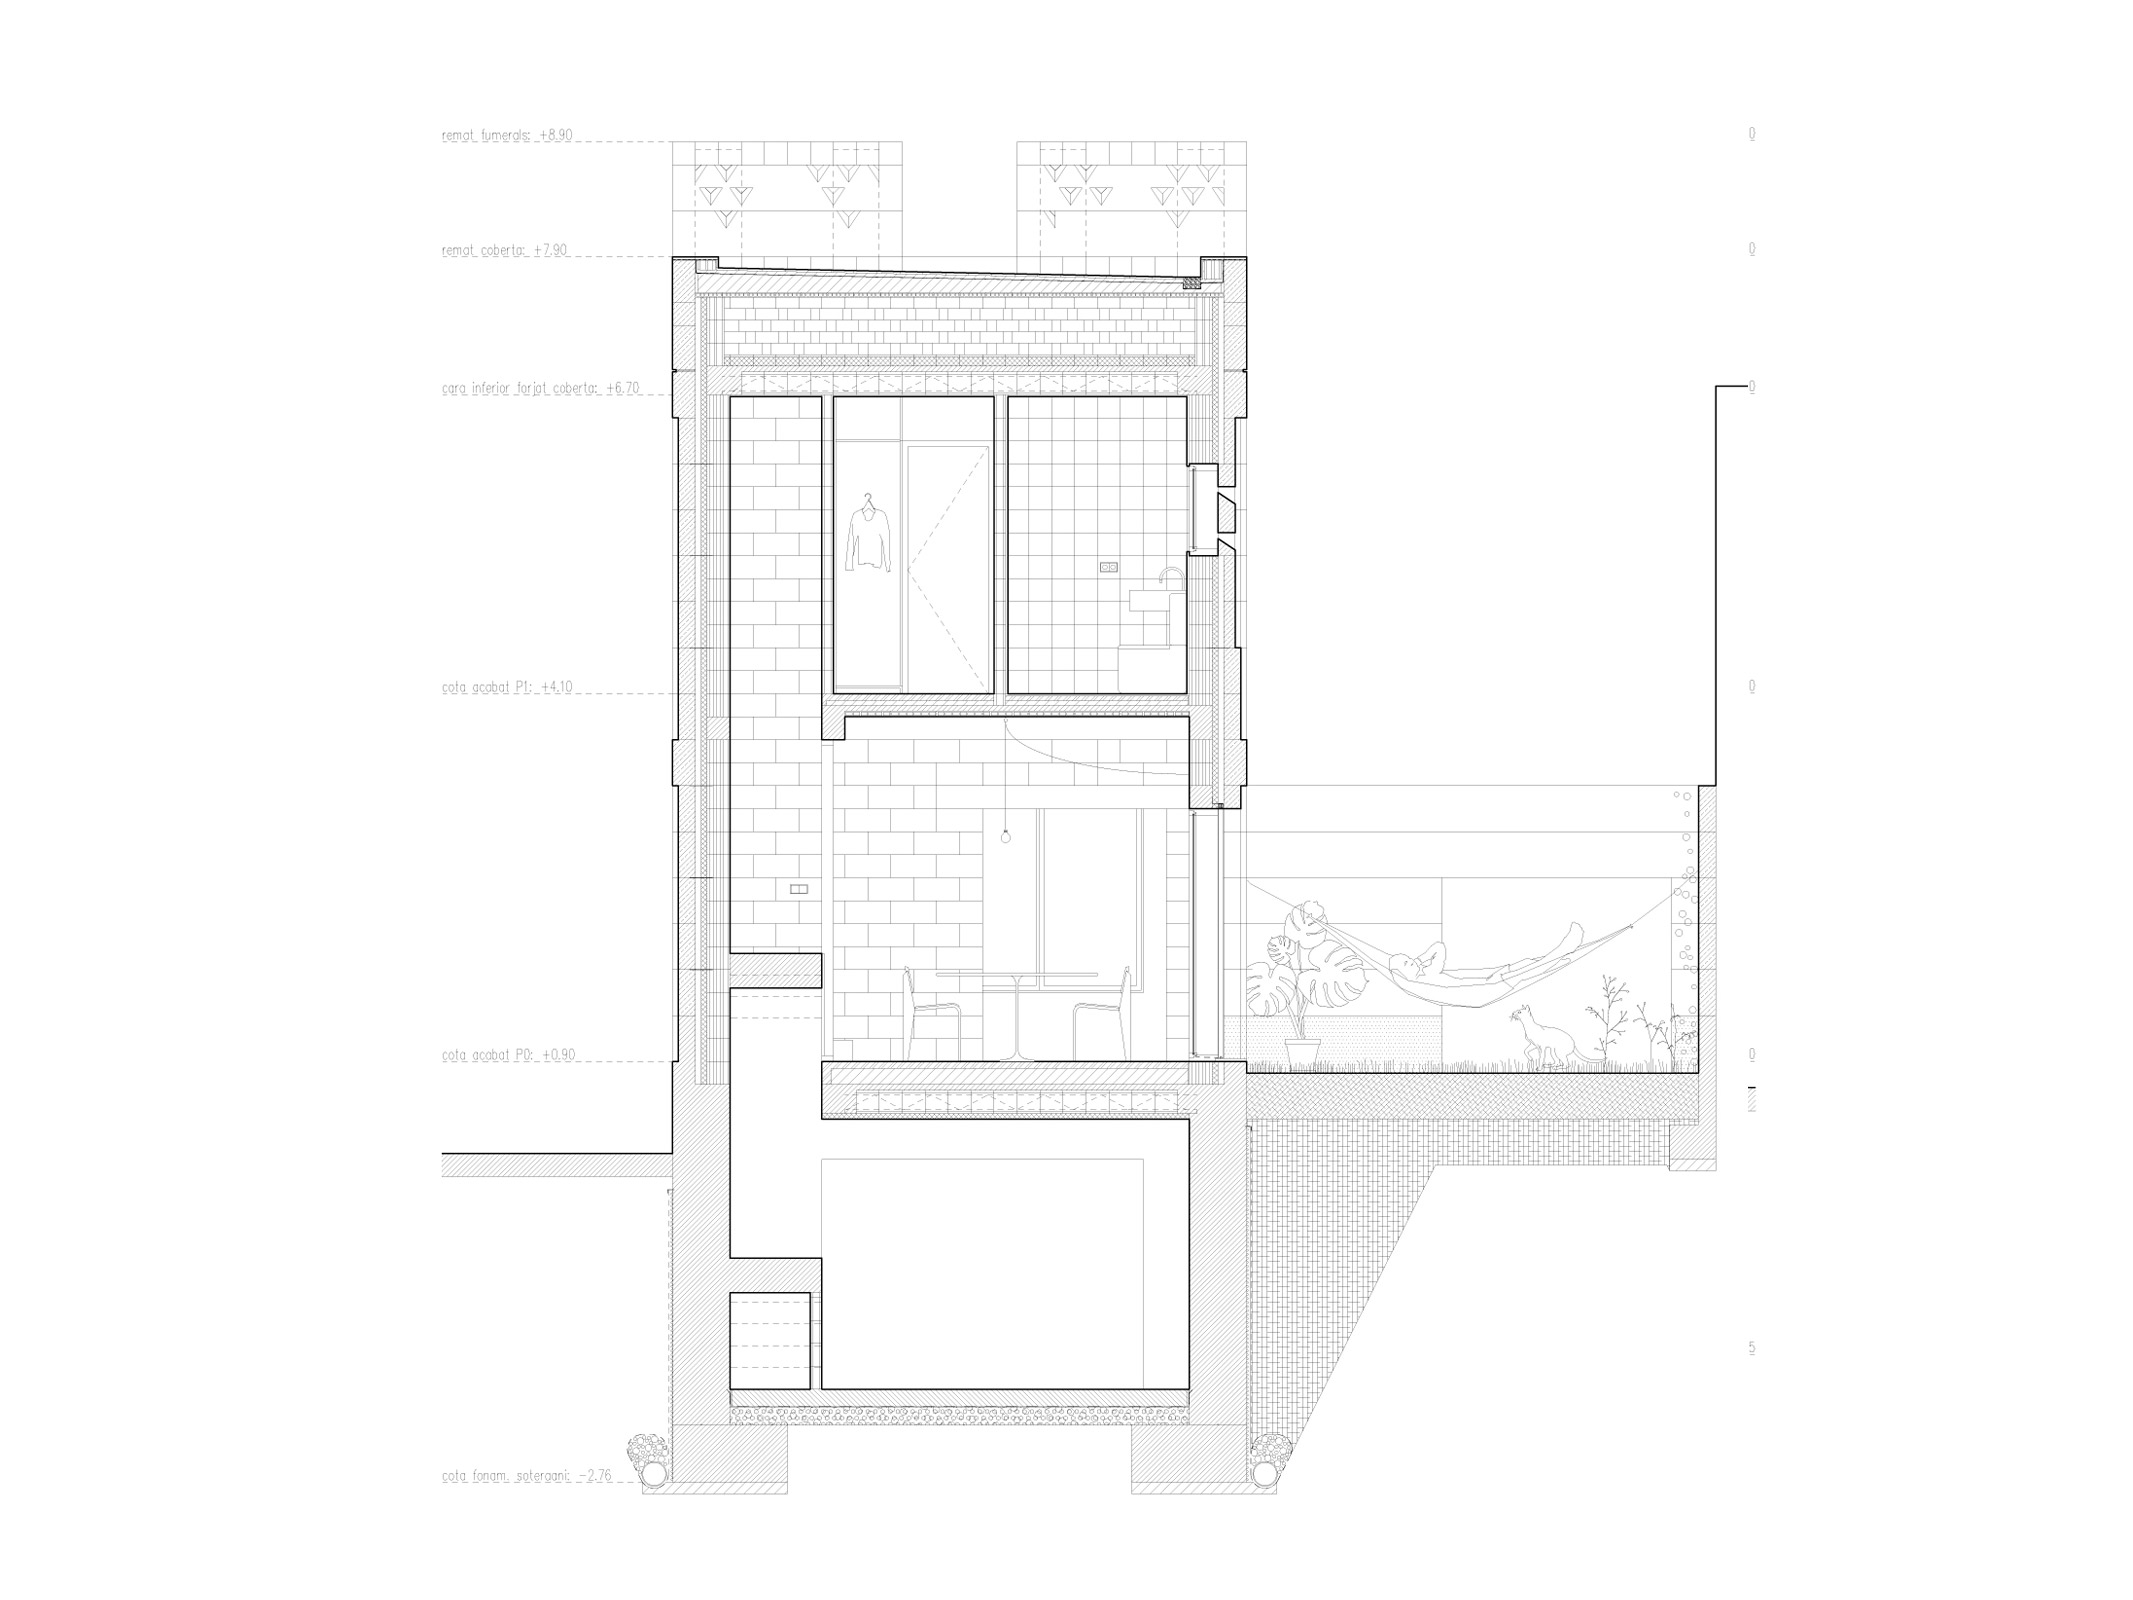 Image of 20230228 TEdA Guillem Plans 4 in Guillem and Cati's home - Cosentino